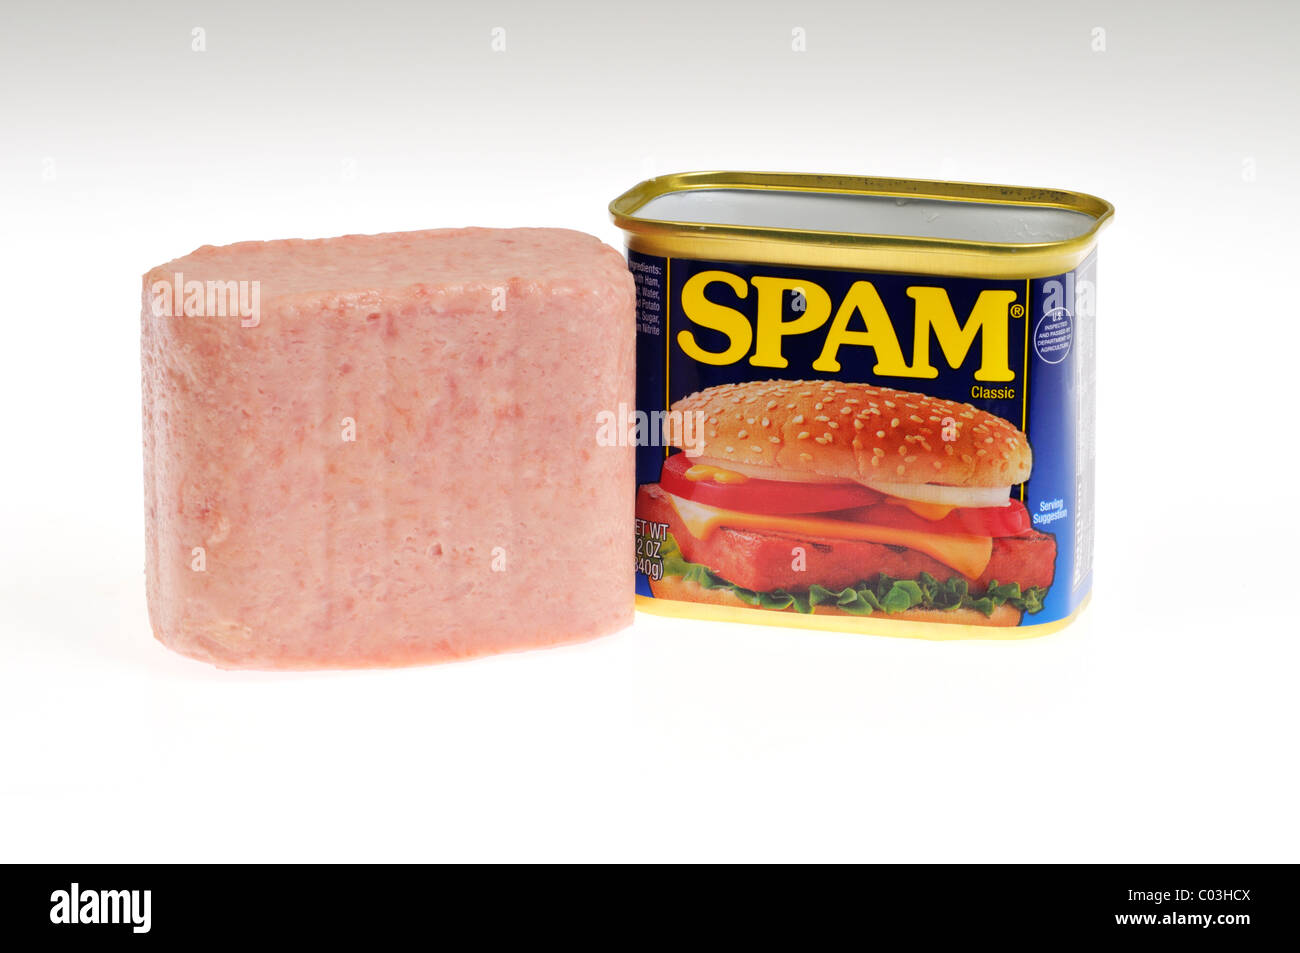 Tin can of Hormel foods Spam opened with spam meat  next to the can on white background, isolated. USA Stock Photo